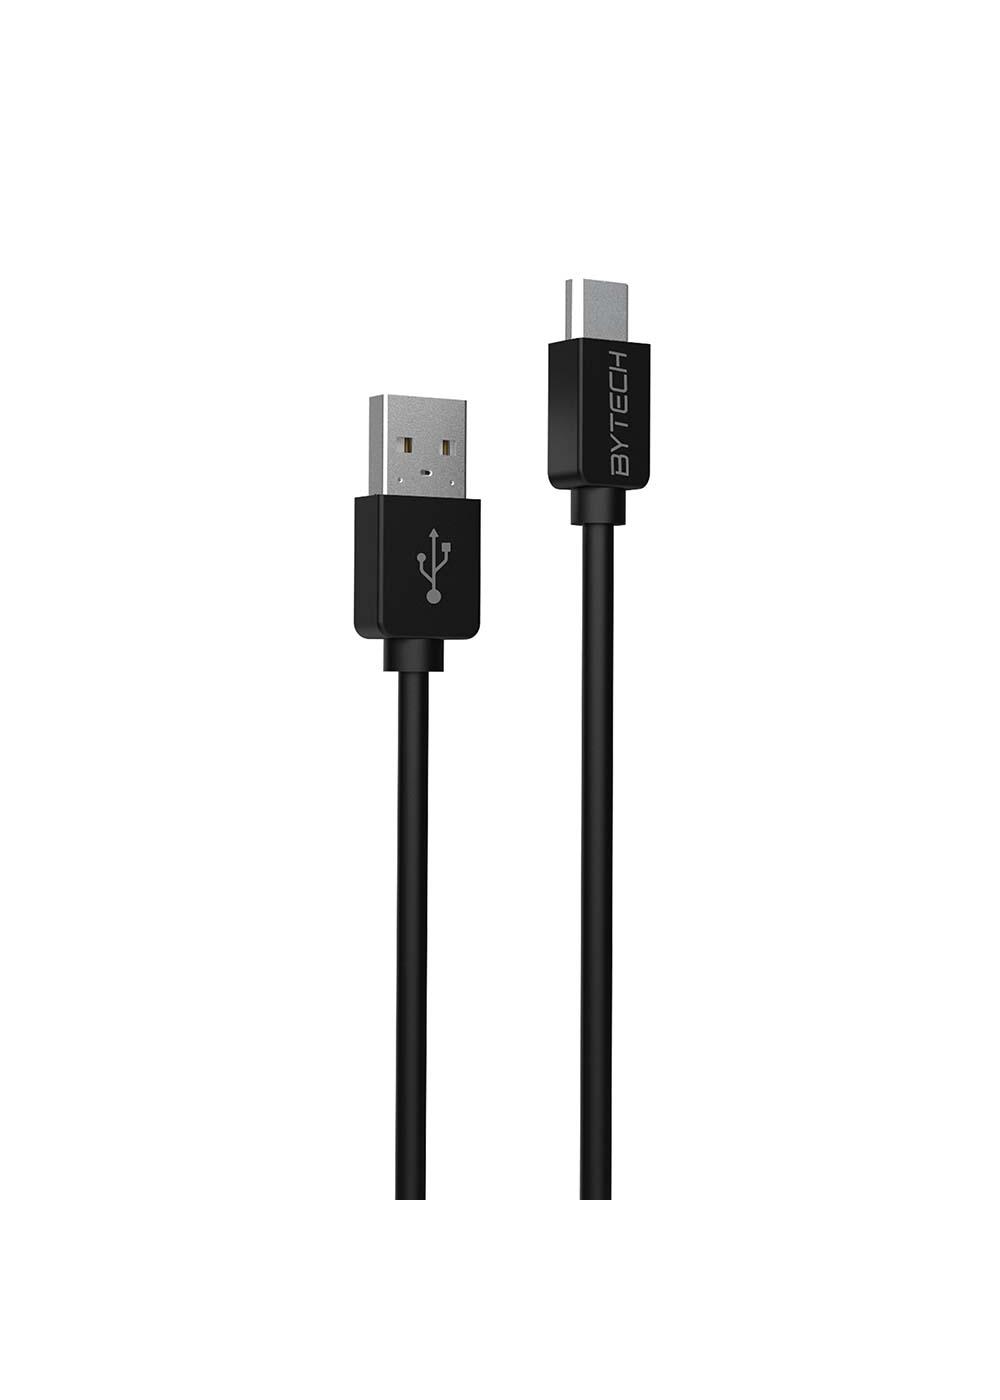 Bytech USB Type-C Charging Cable - Black; image 2 of 3